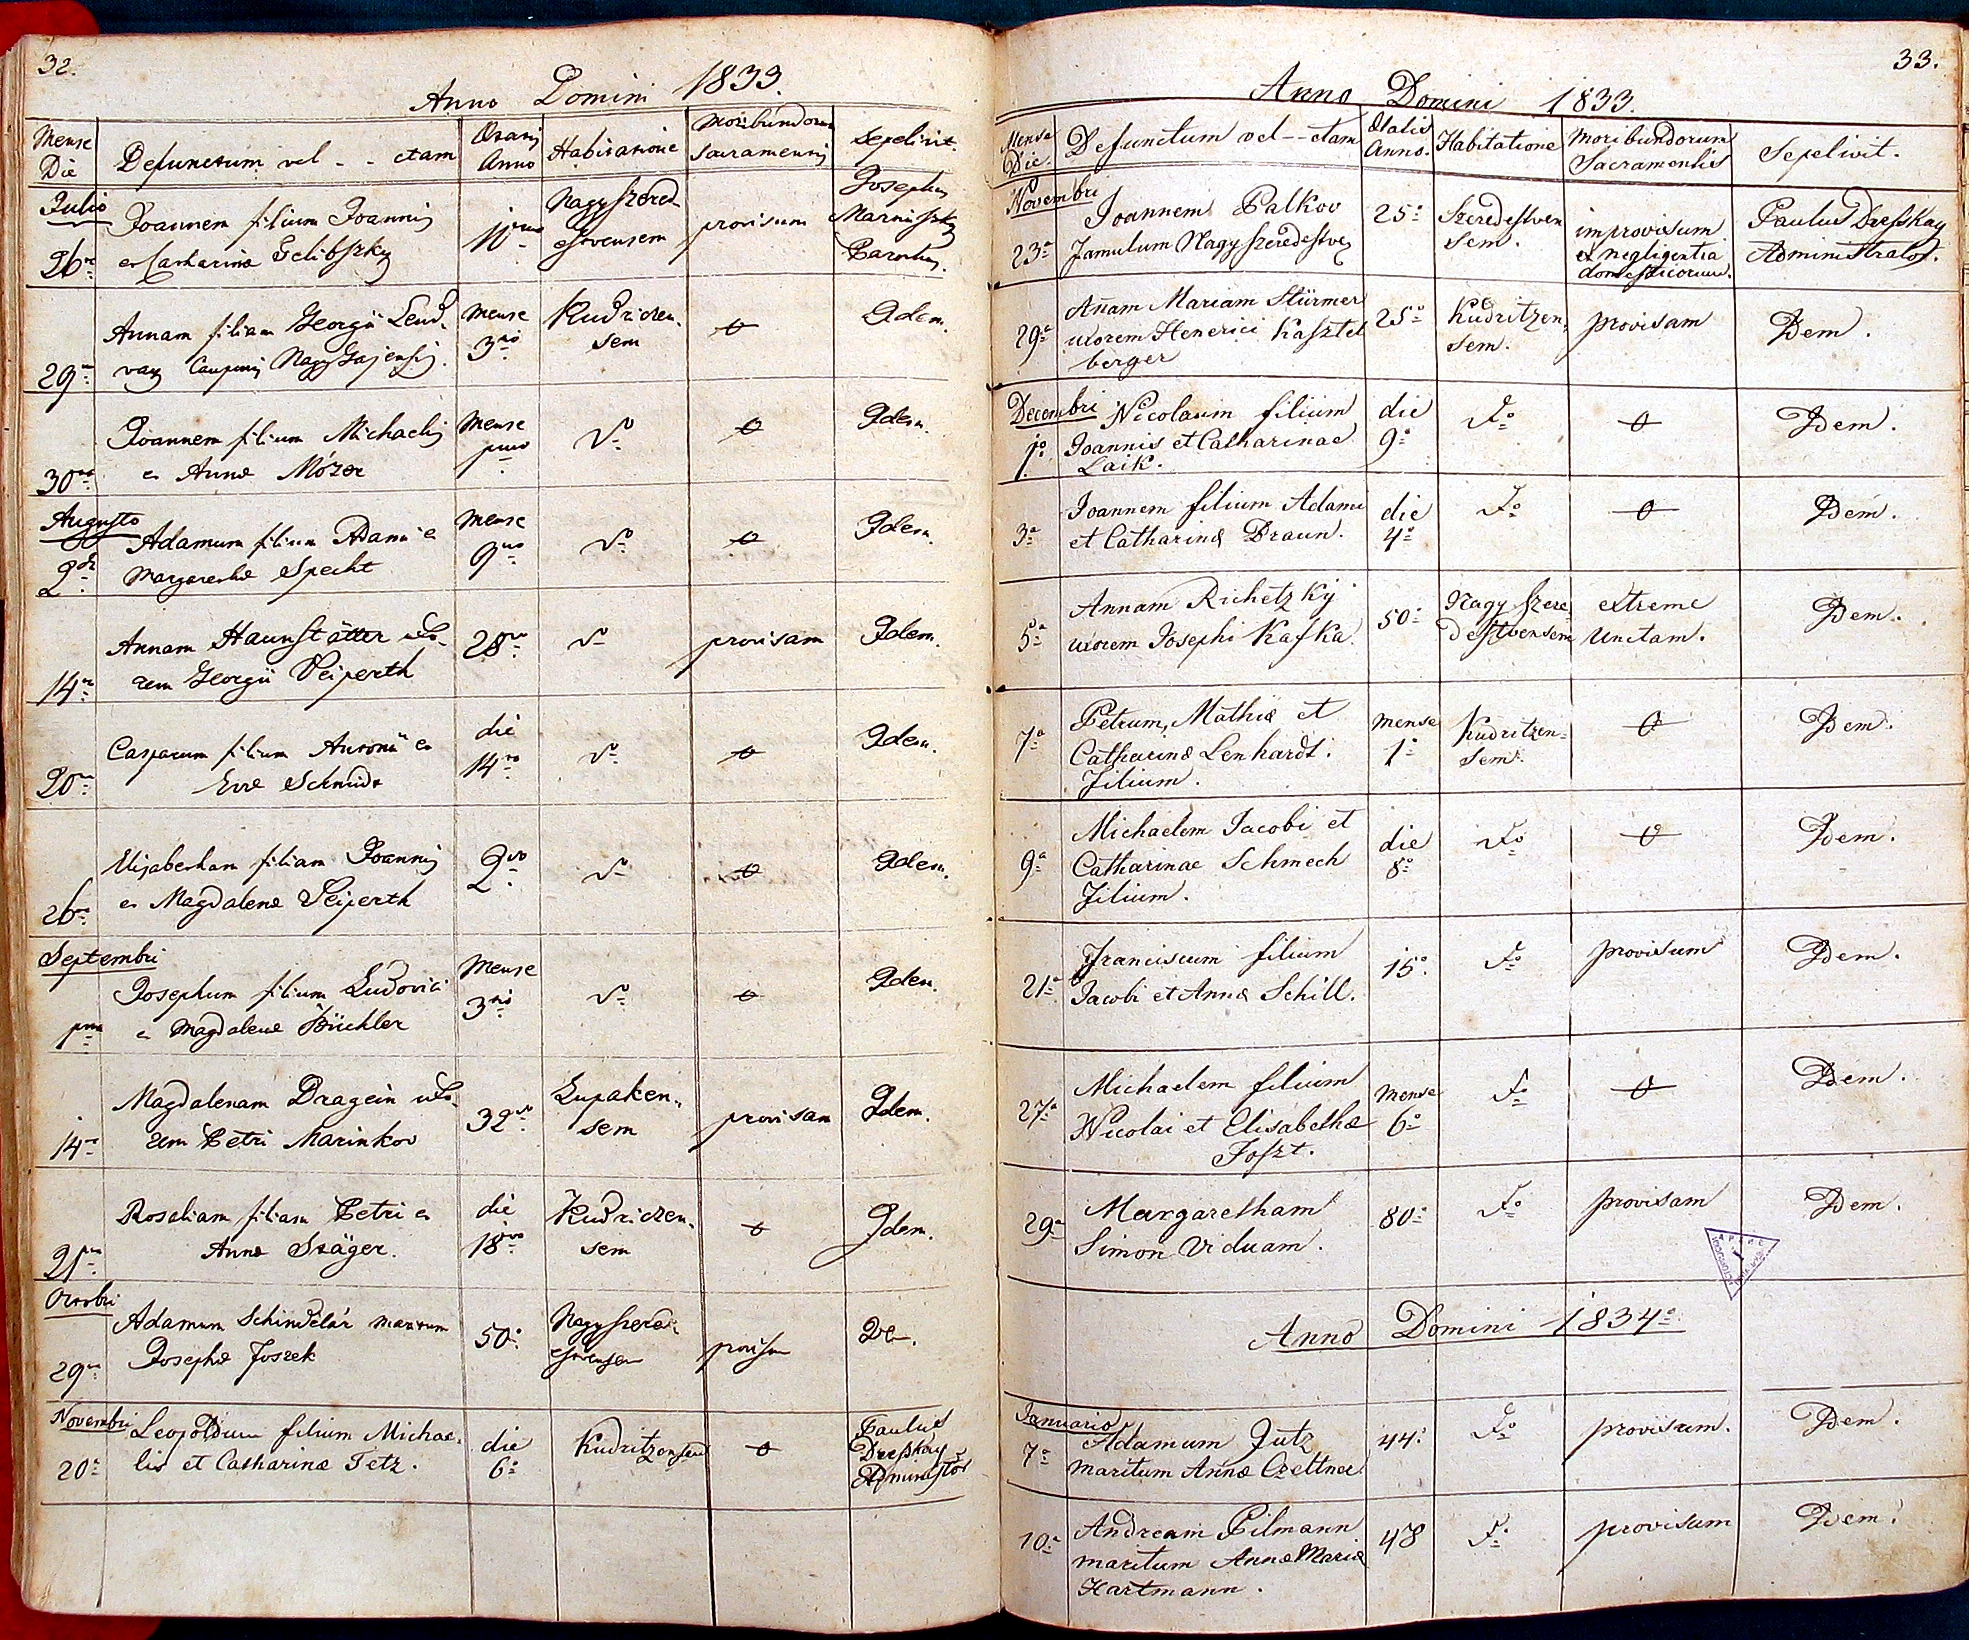 images/church_records/DEATHS/1775-1828D/032 i 033